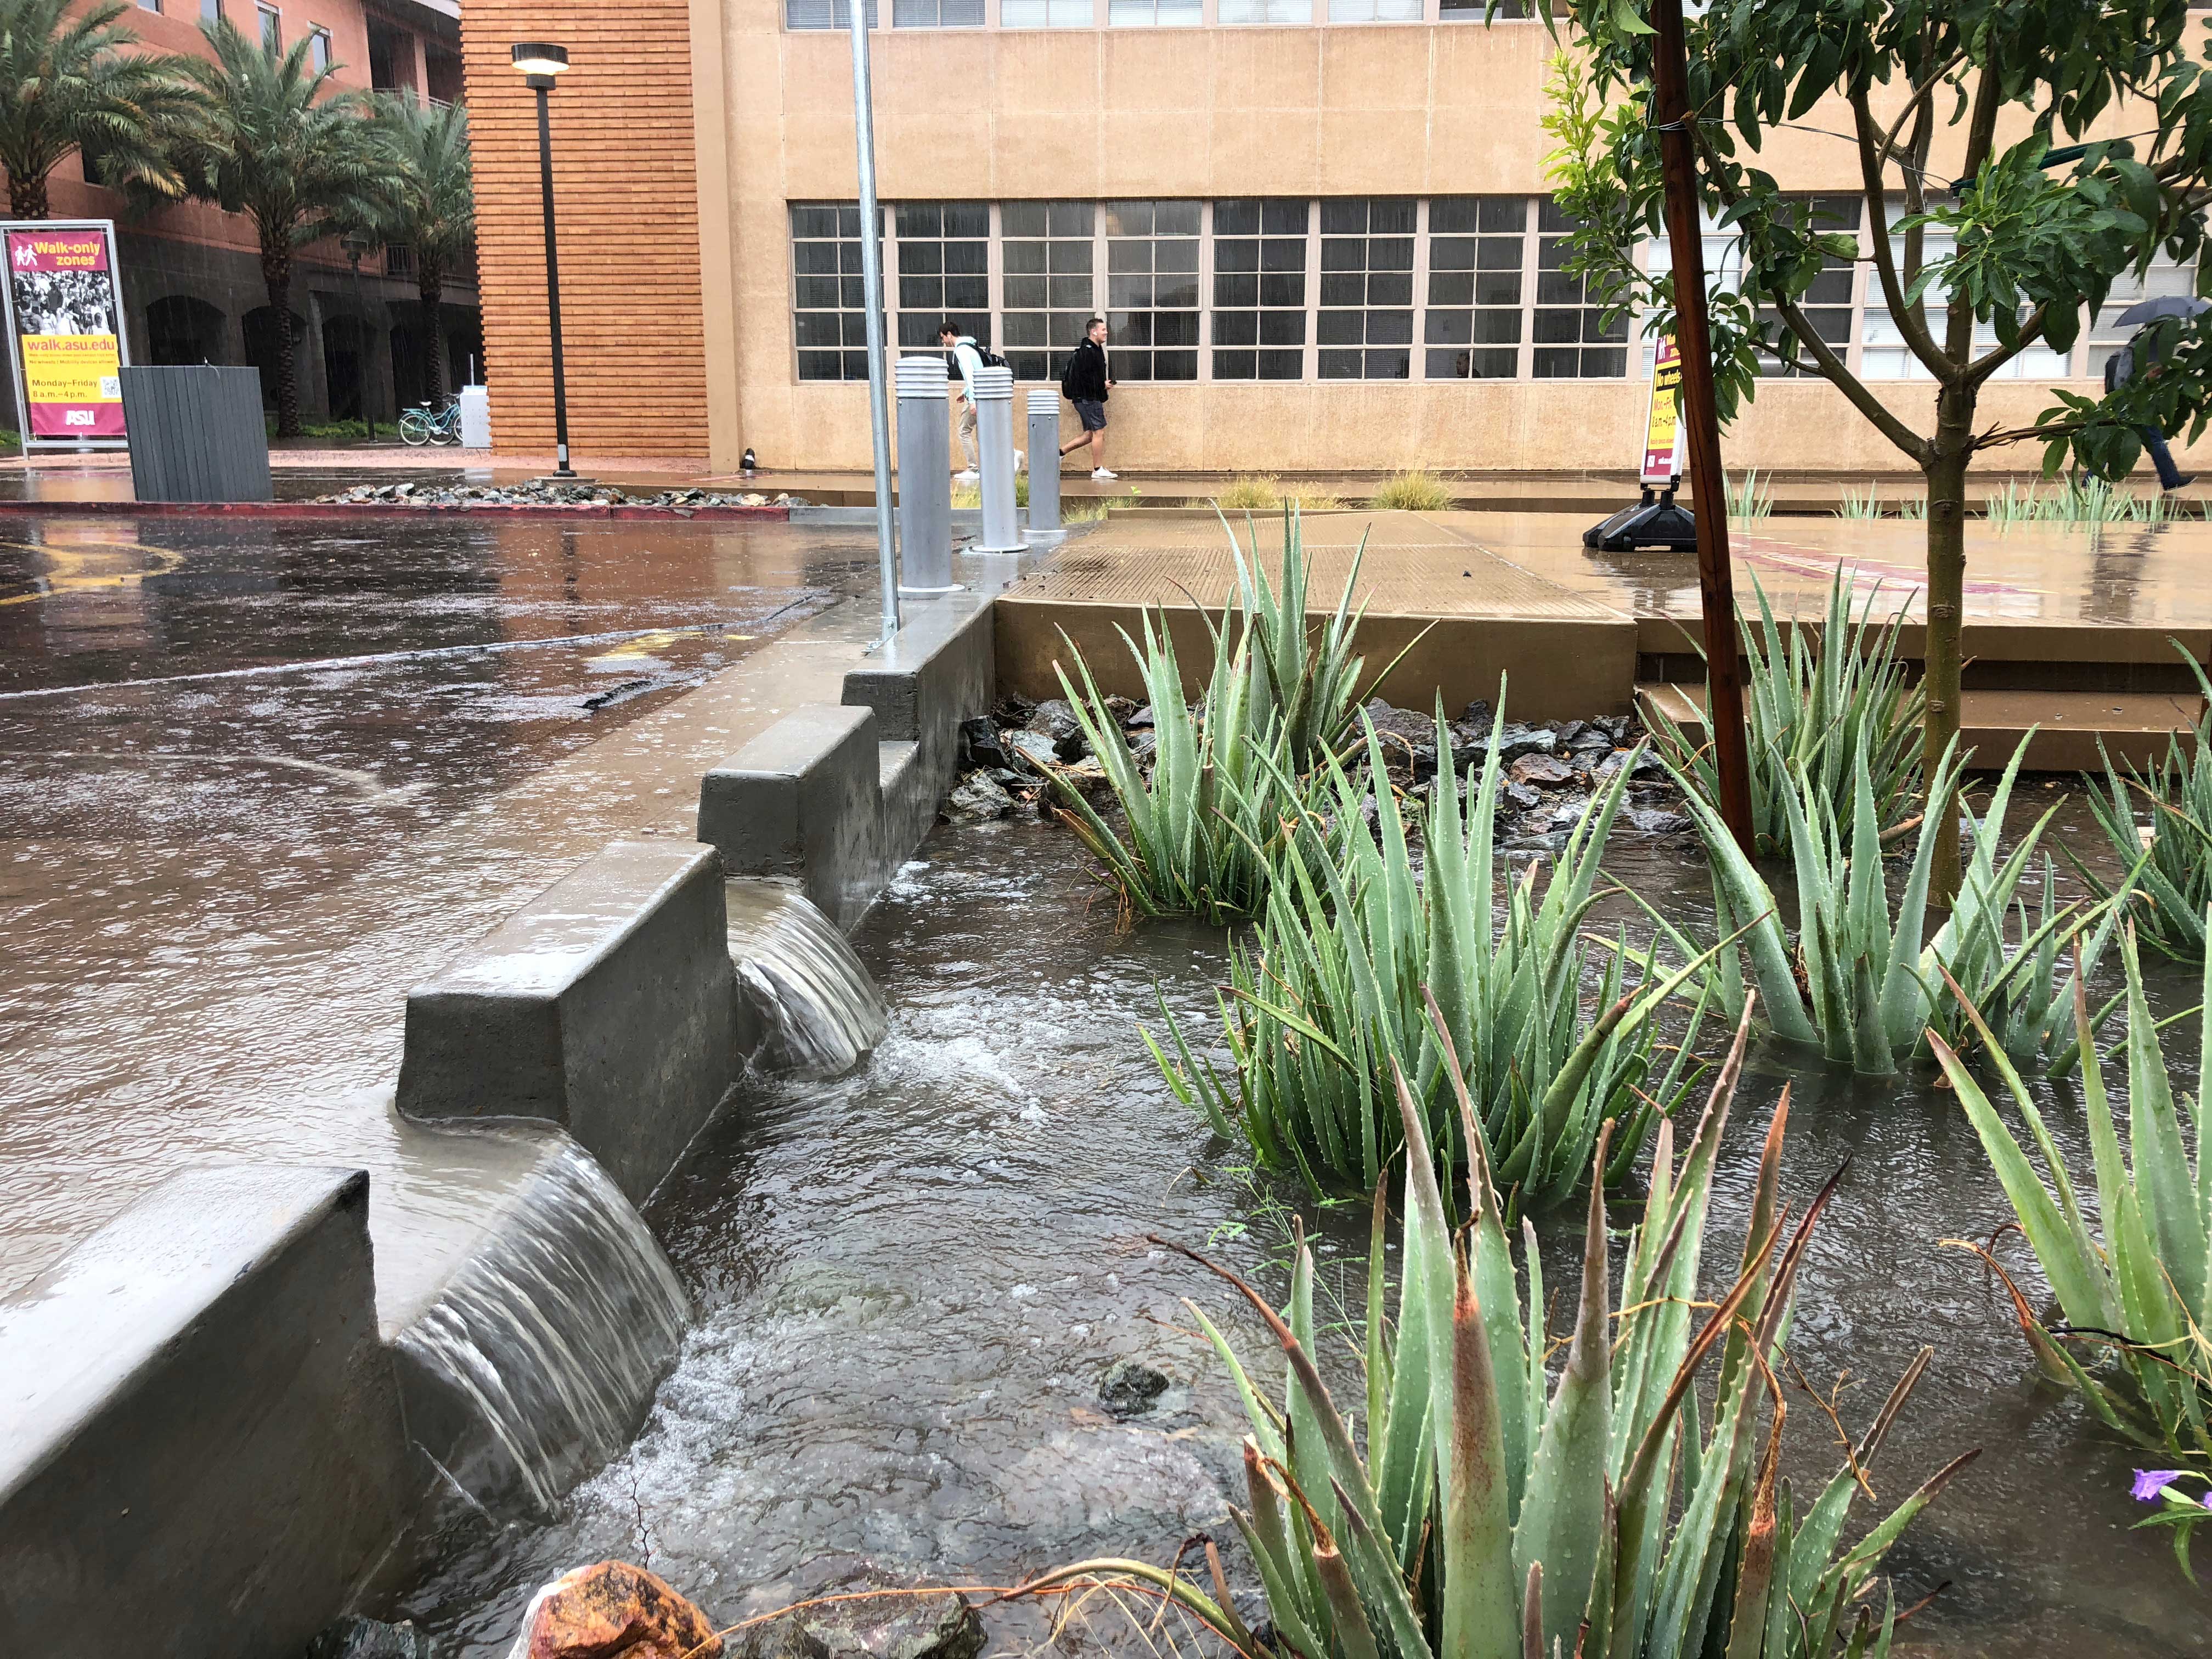 Water runs into a bioswell on ASU's Tempe campus that houses plants and rocks